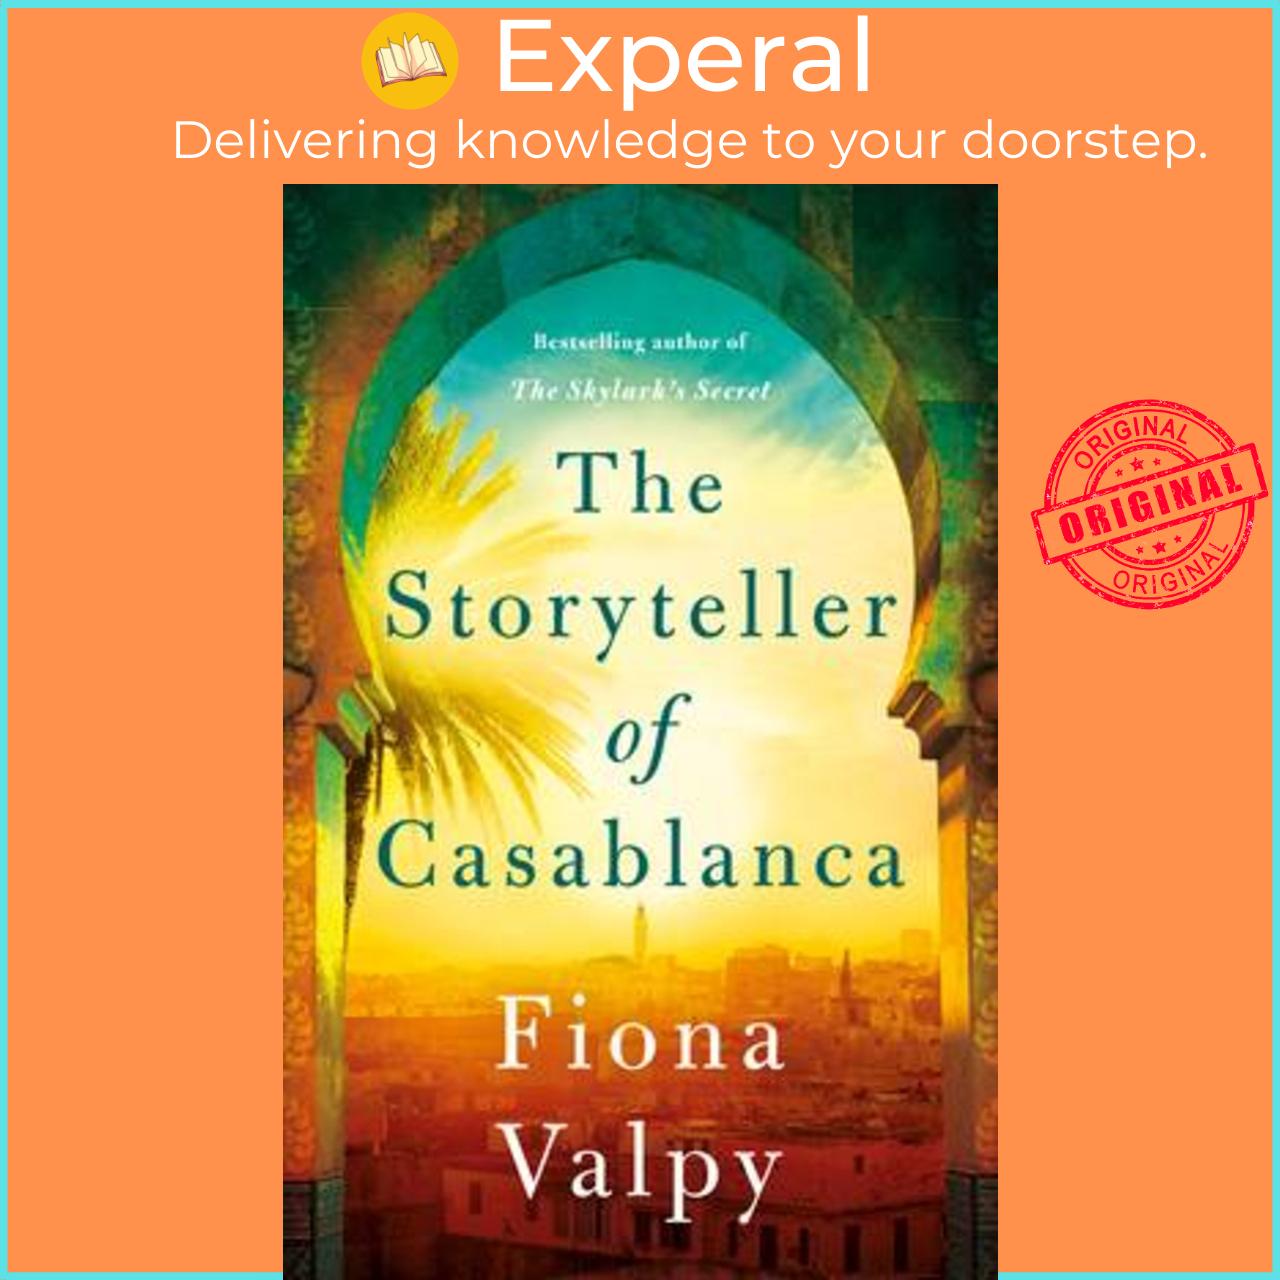 Sách - The Storyteller of Casablanca by Fiona Valpy (US edition, paperback)